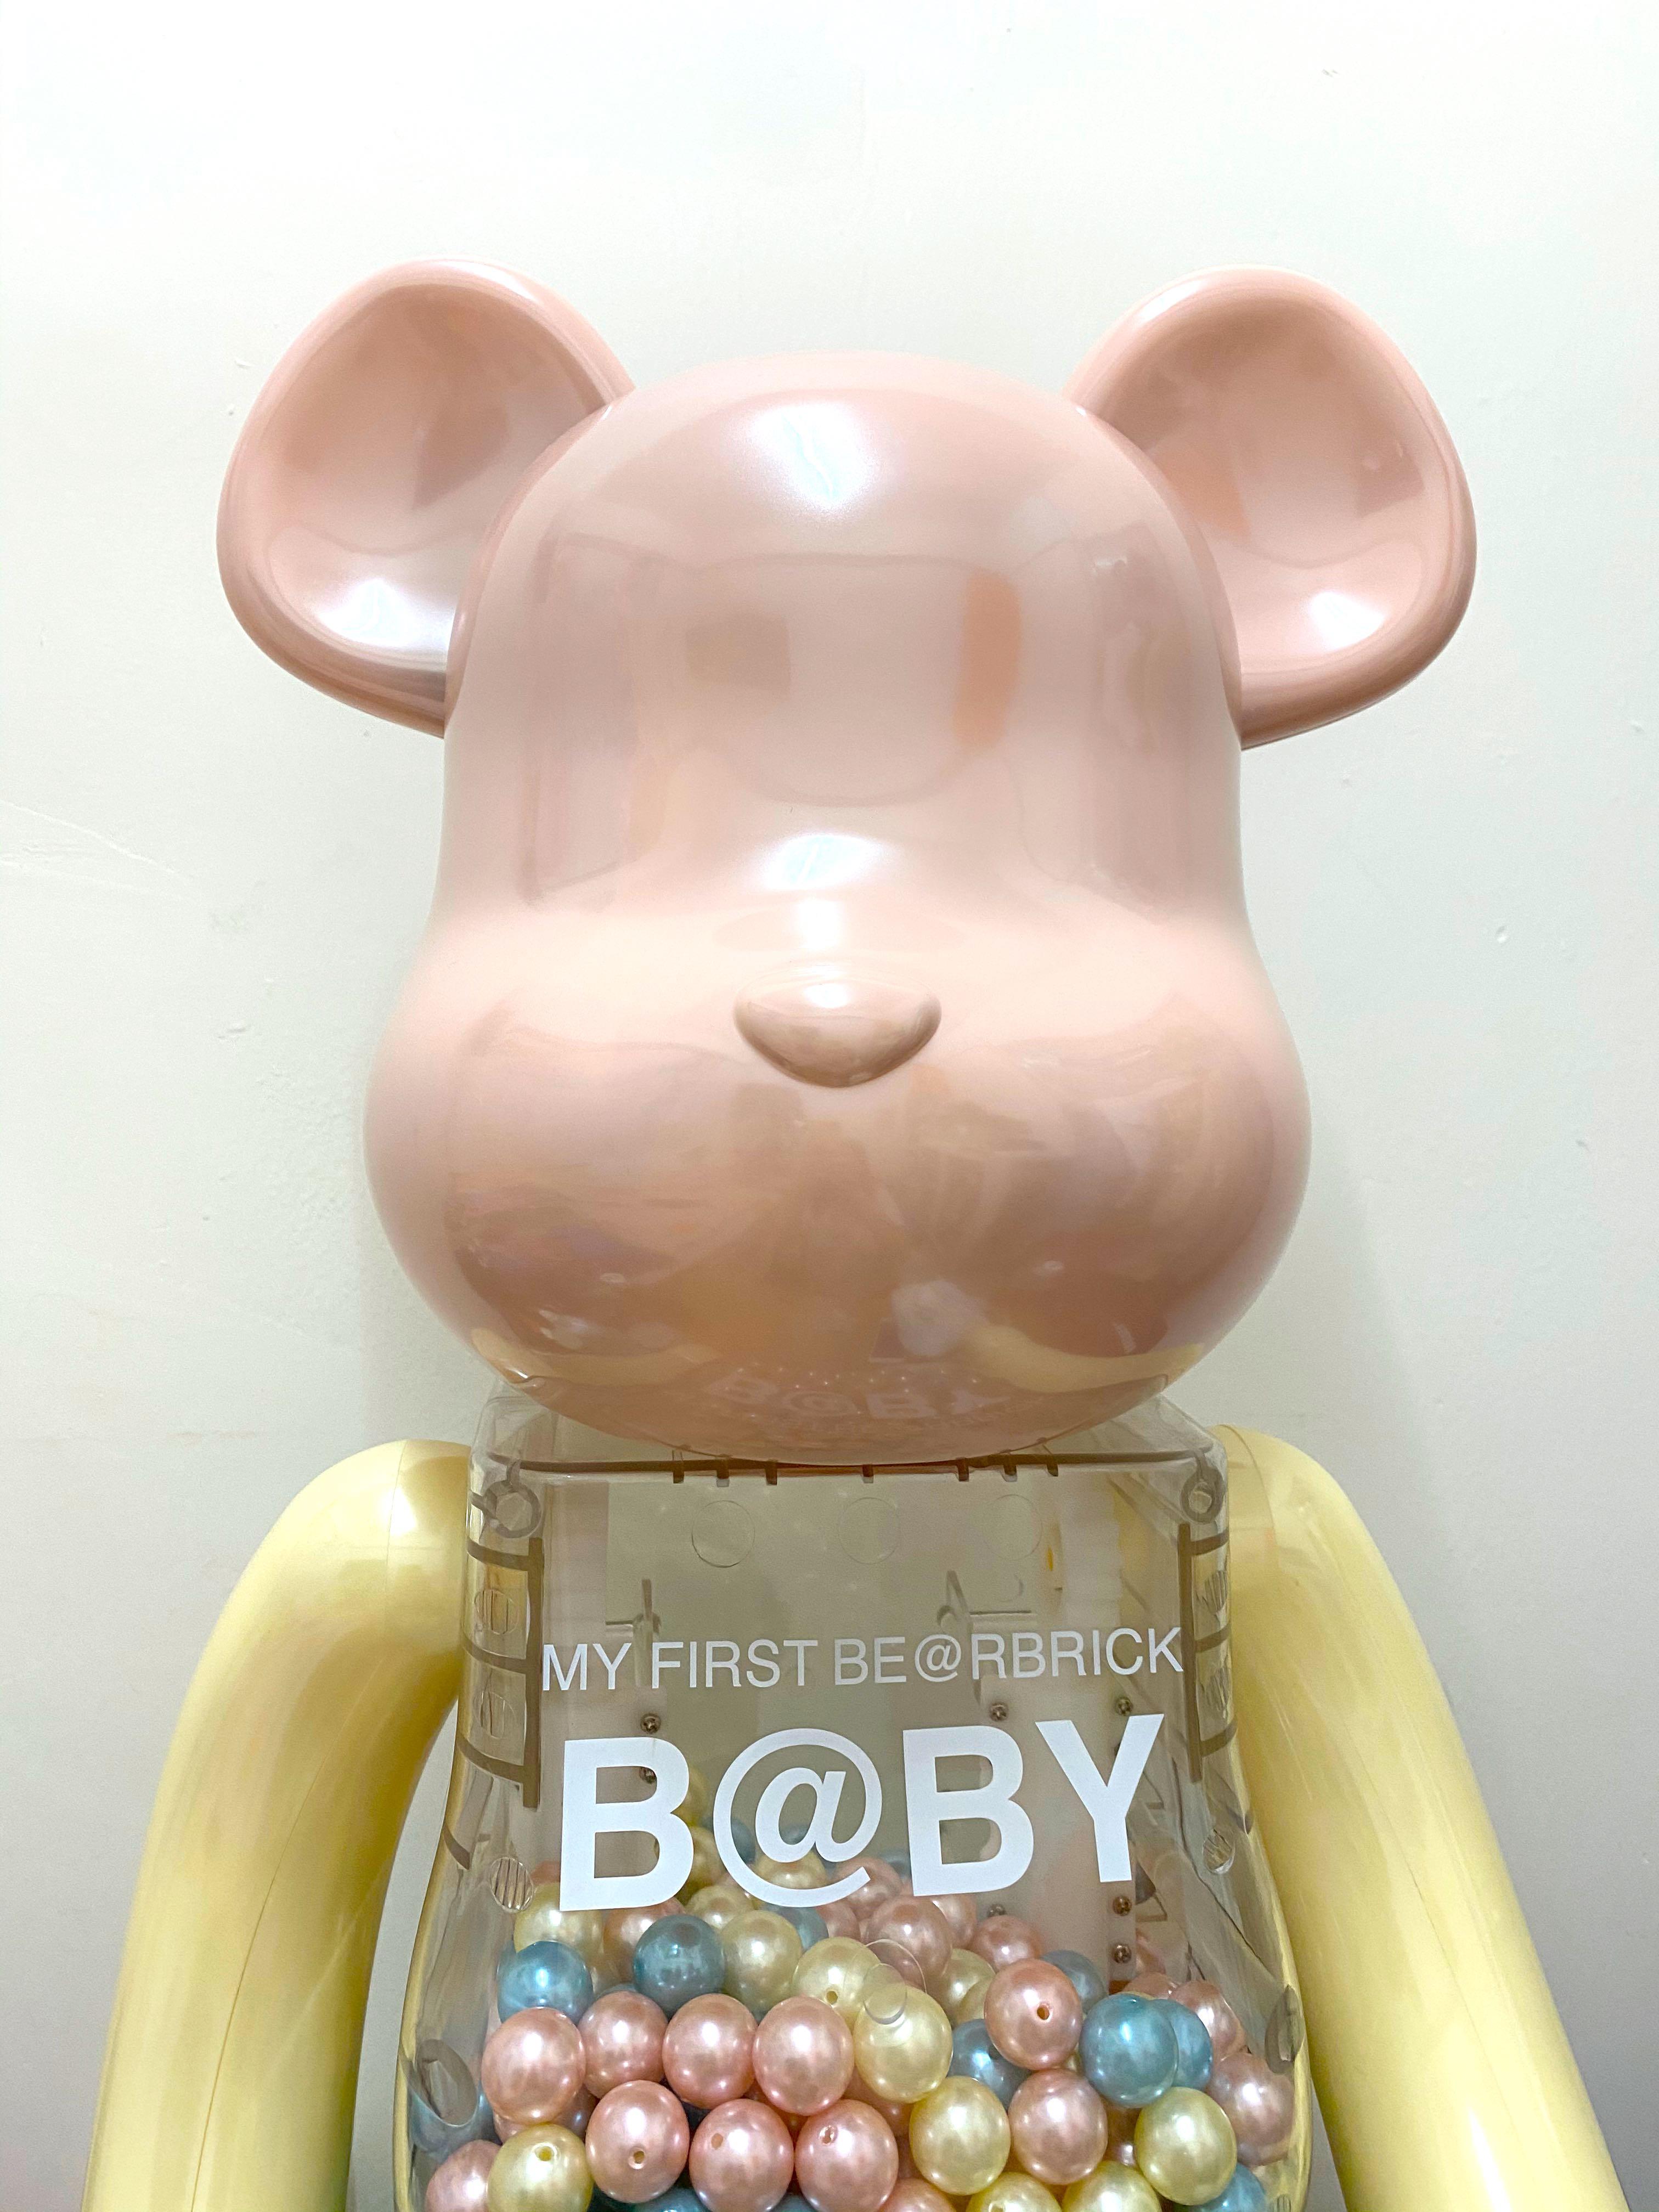 Medicom Toy my first bearbrick baby 1000% be@rbrick b@by pearl 